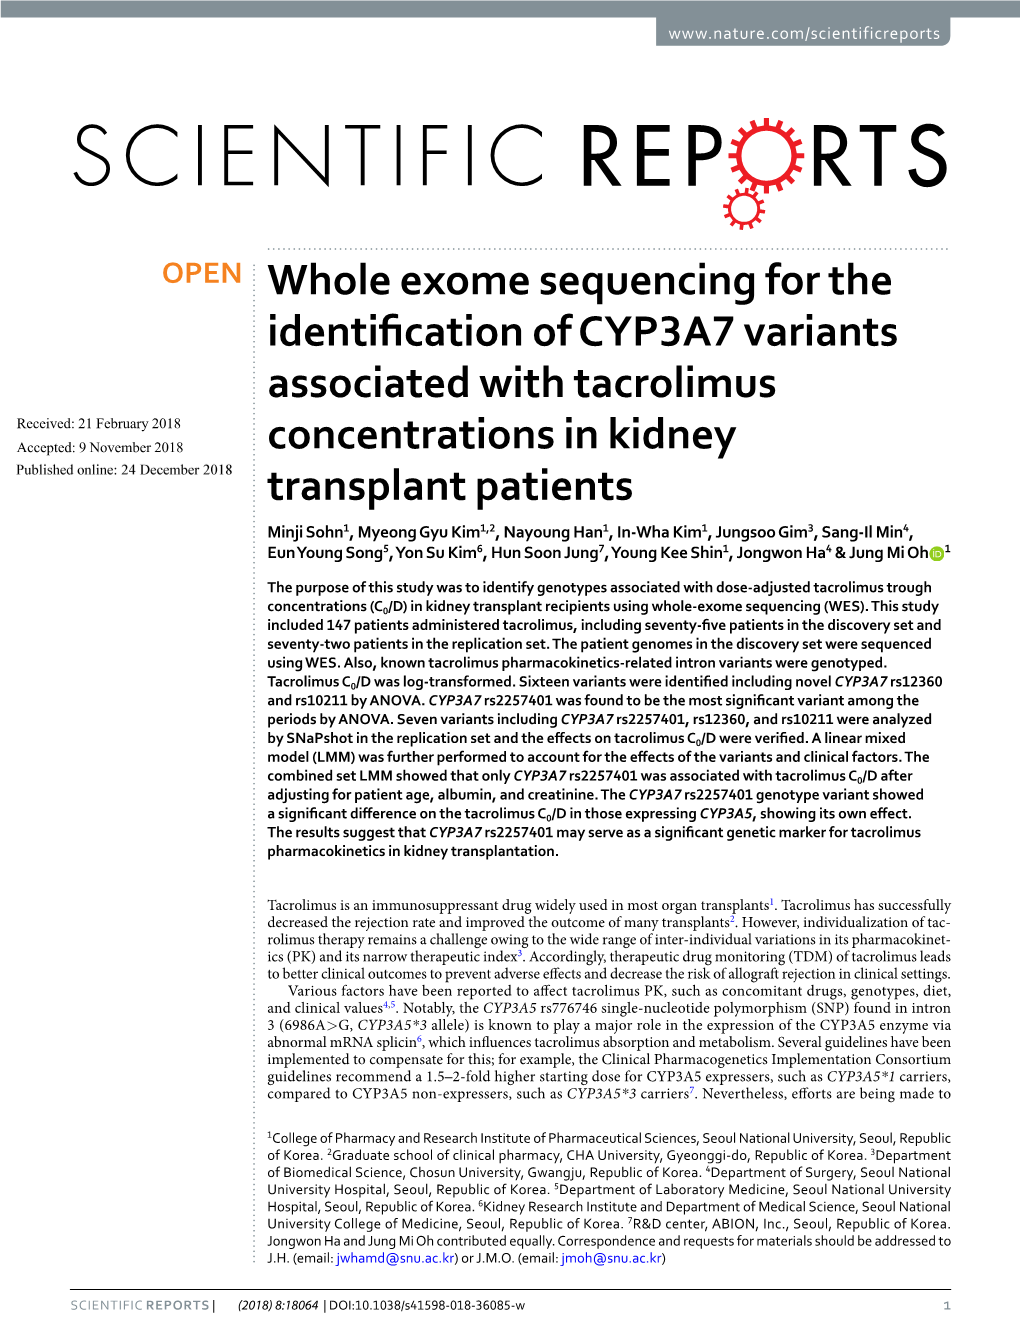 Whole Exome Sequencing for the Identification of CYP3A7 Variants